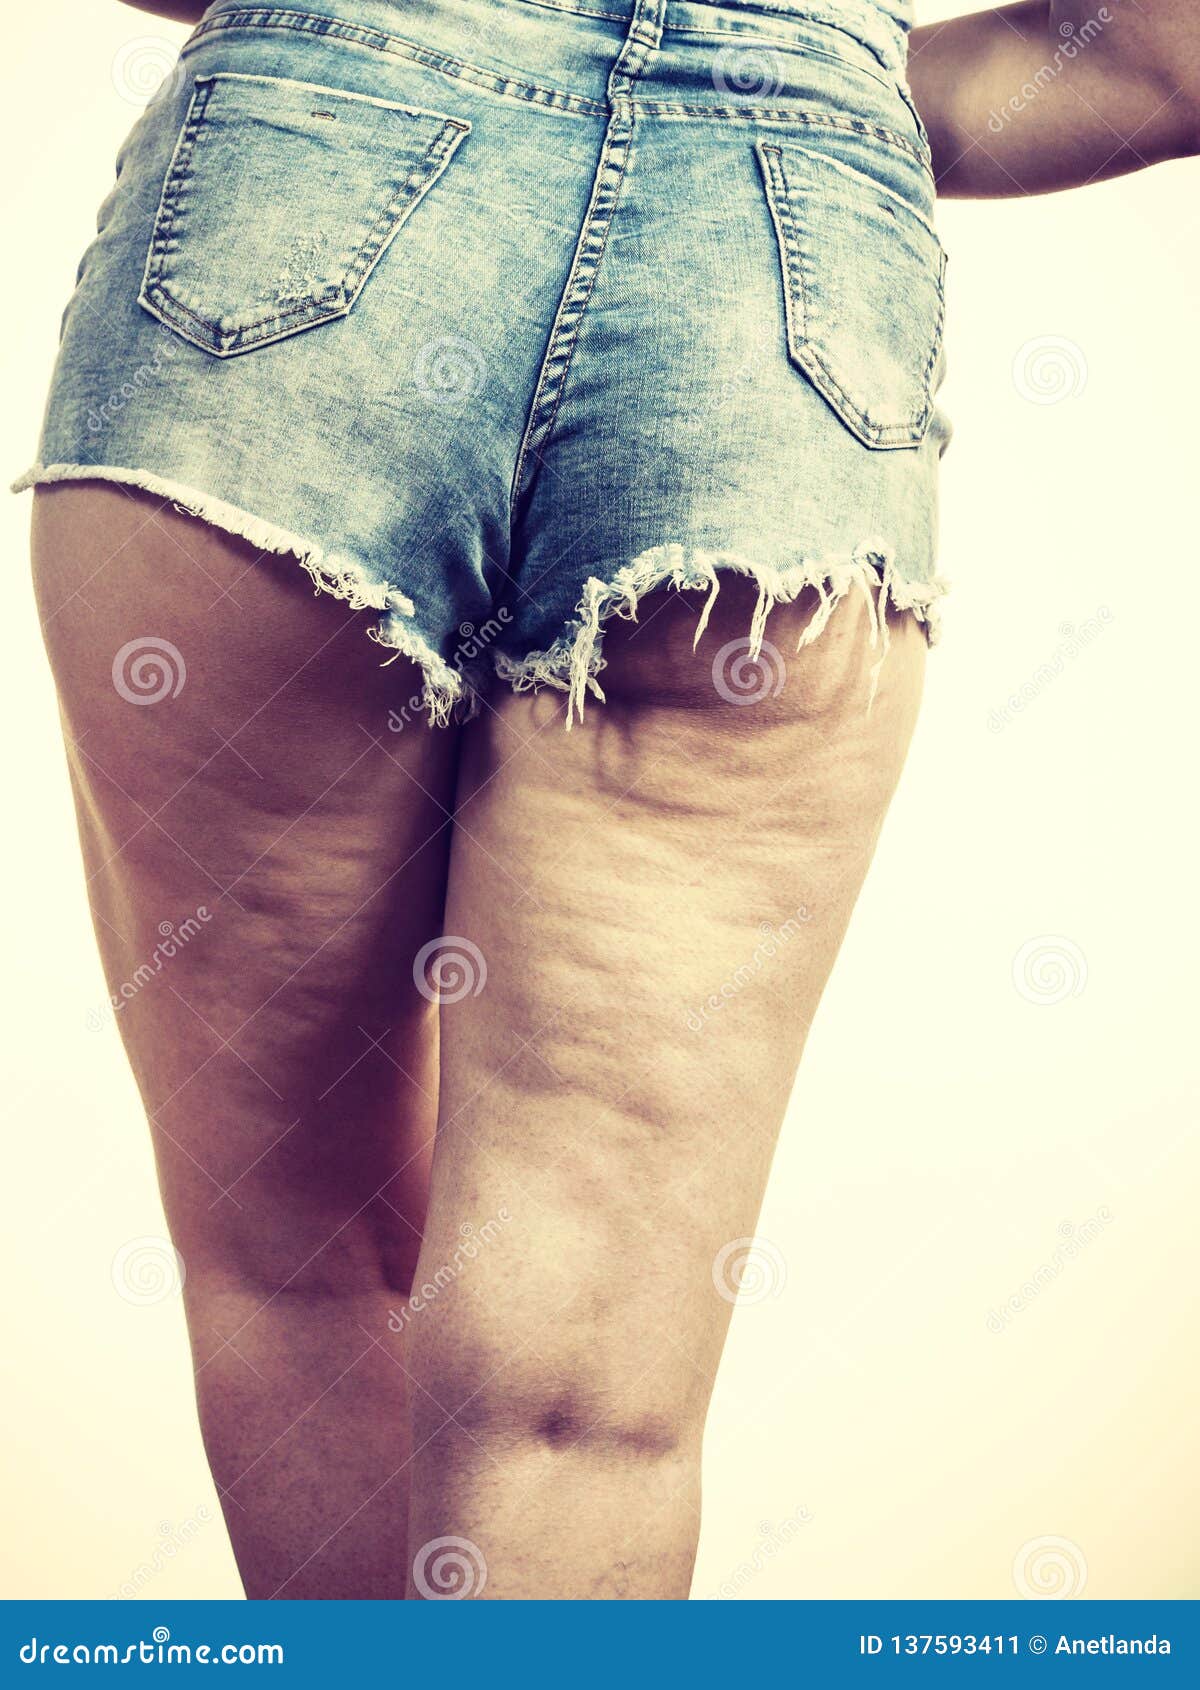 Woman Legs With Cellulite Skin Stock Image Image Of Cellulite Body 137593411